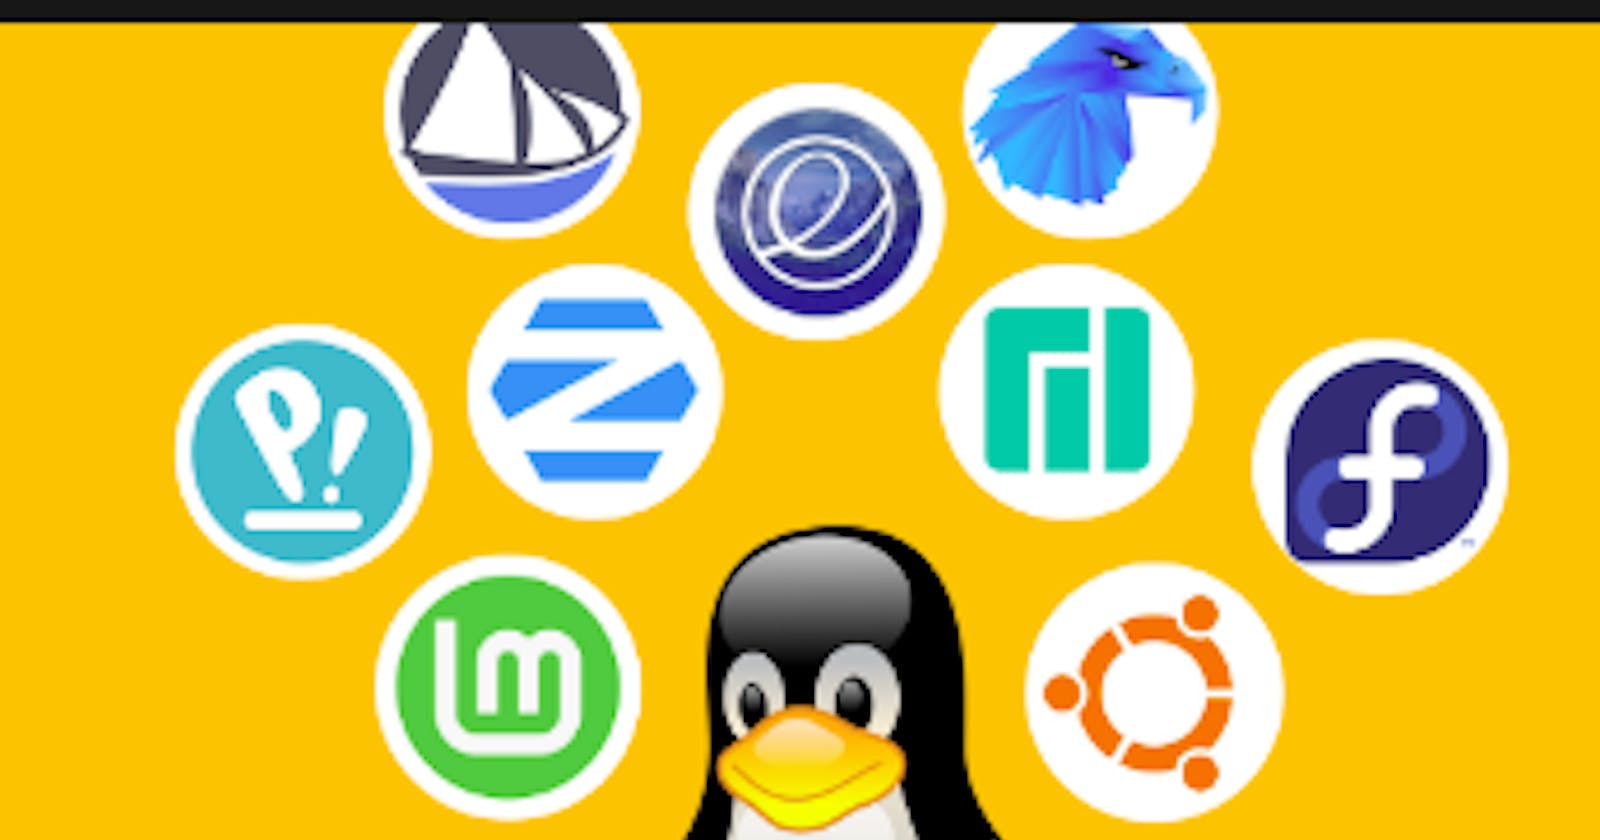 Exploring Linux Distros: A Tale of Two Systems - Pop!_OS and Ubuntu